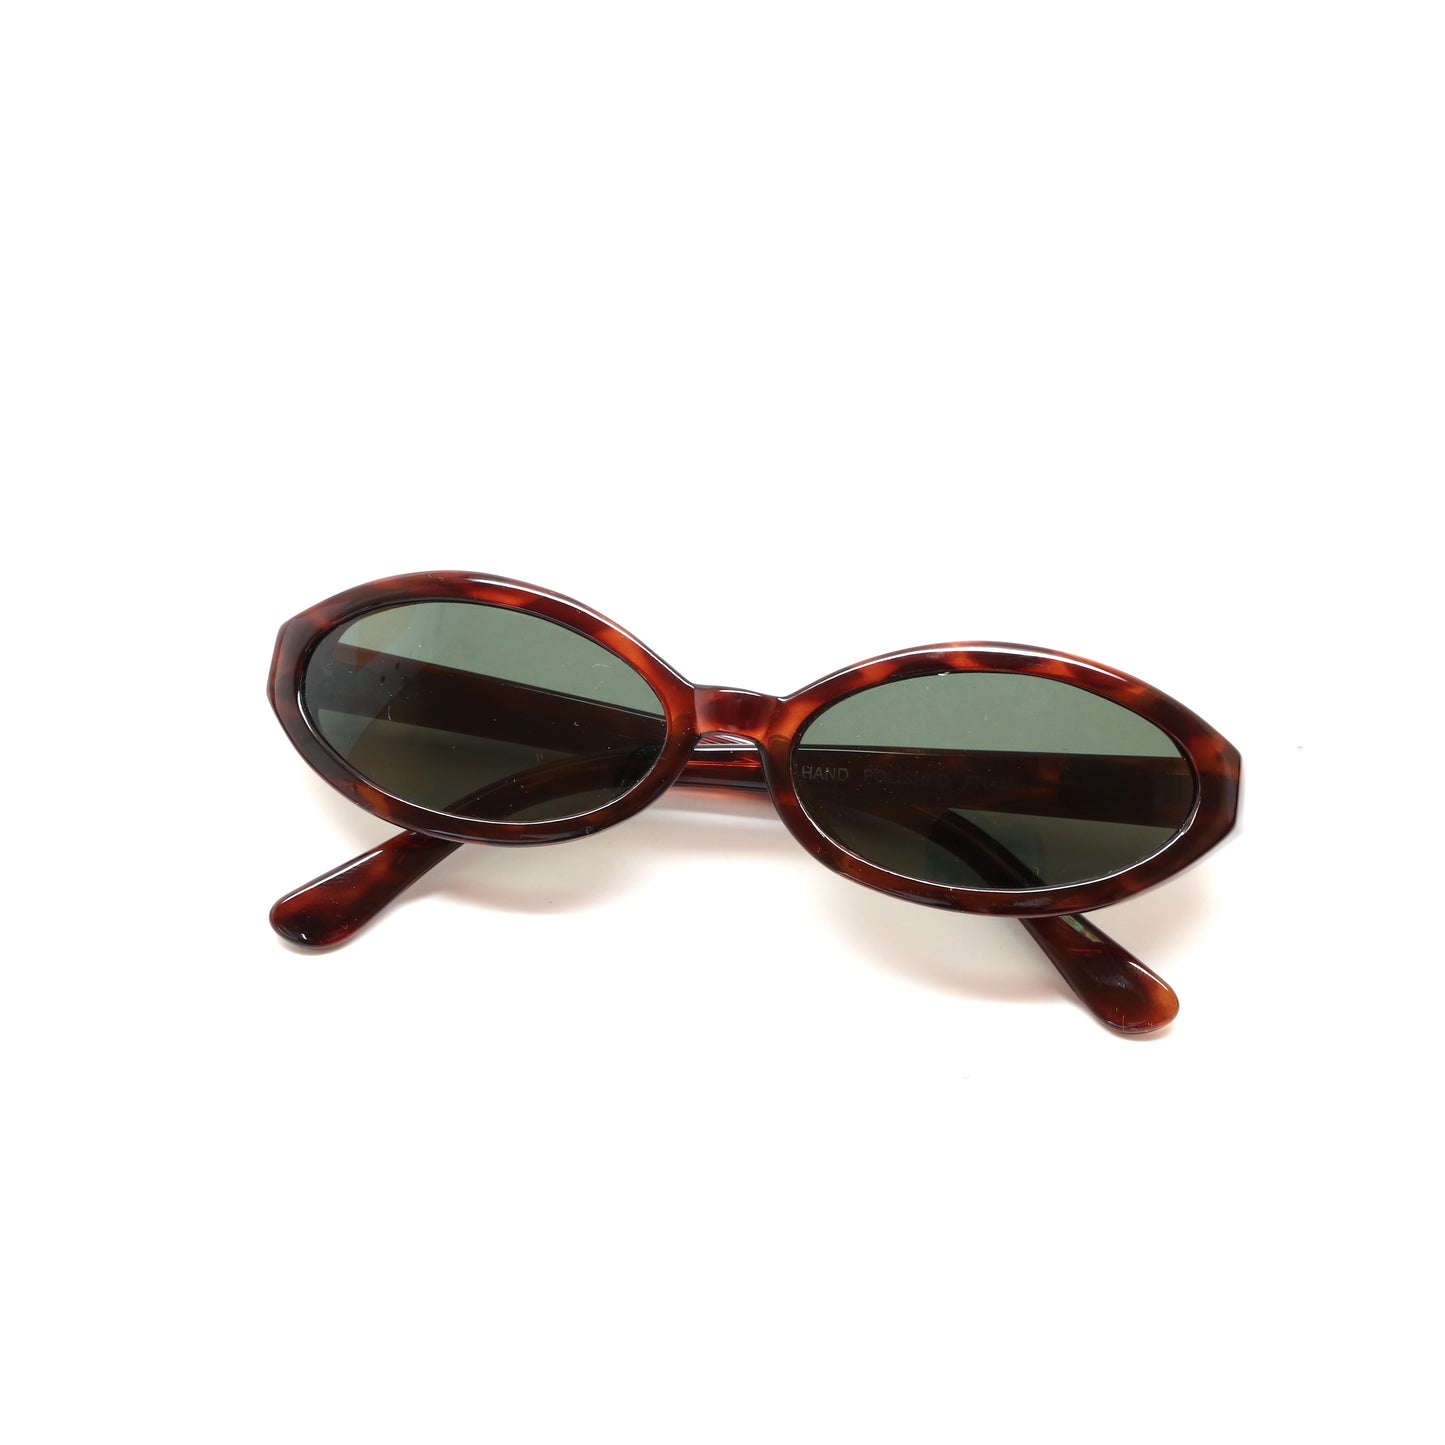 Deluxe Vintage 90s Deadstock High Quality Oval Sunglasses - Tortoise